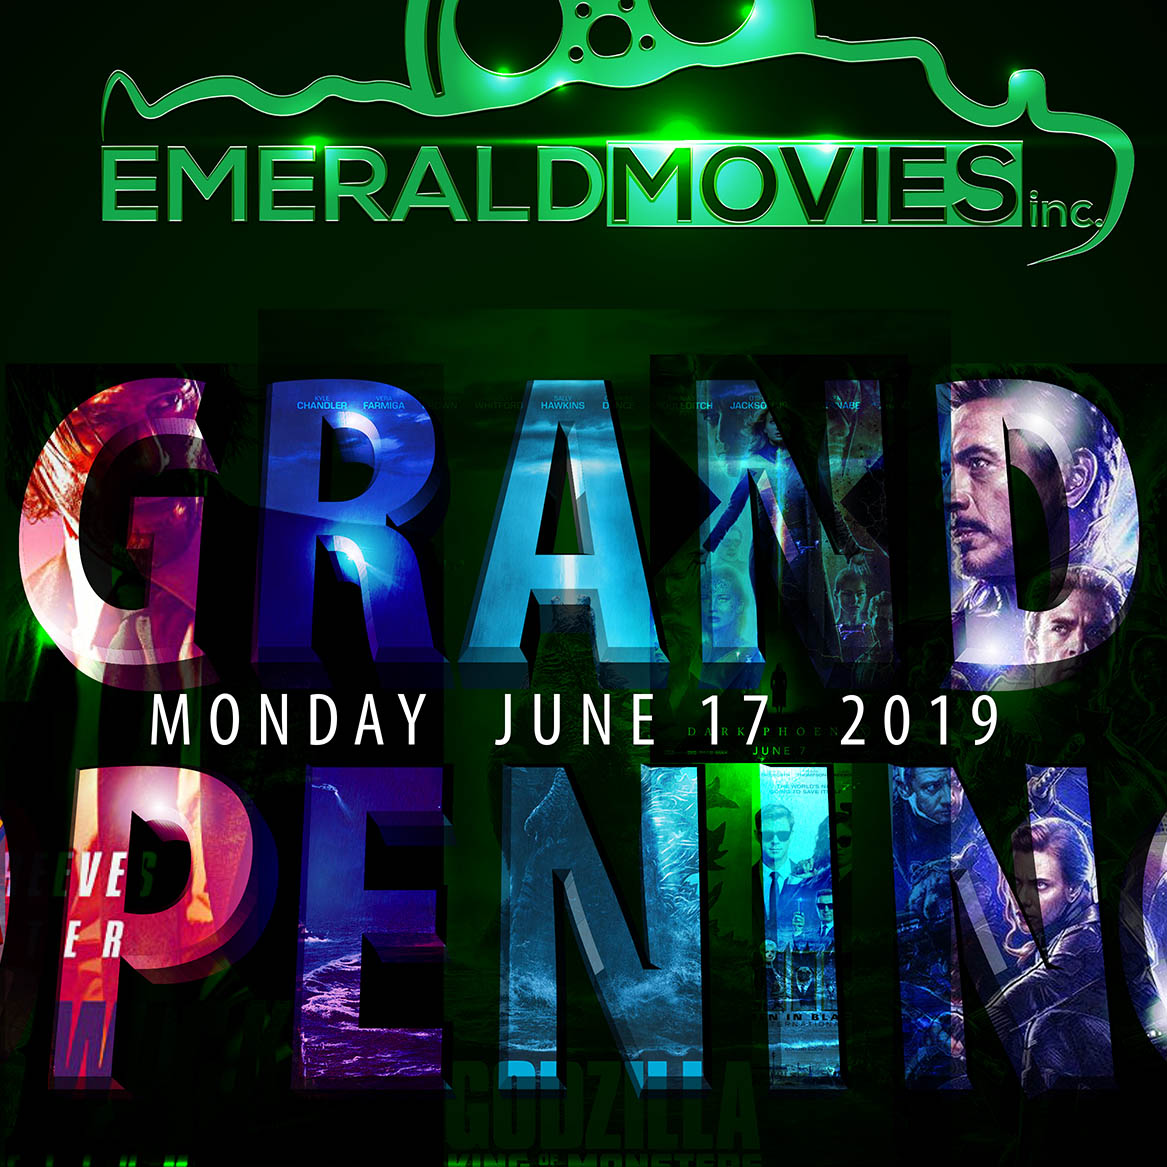 Emerald Movies | Opening Promotional Concept | Design | Brand Management